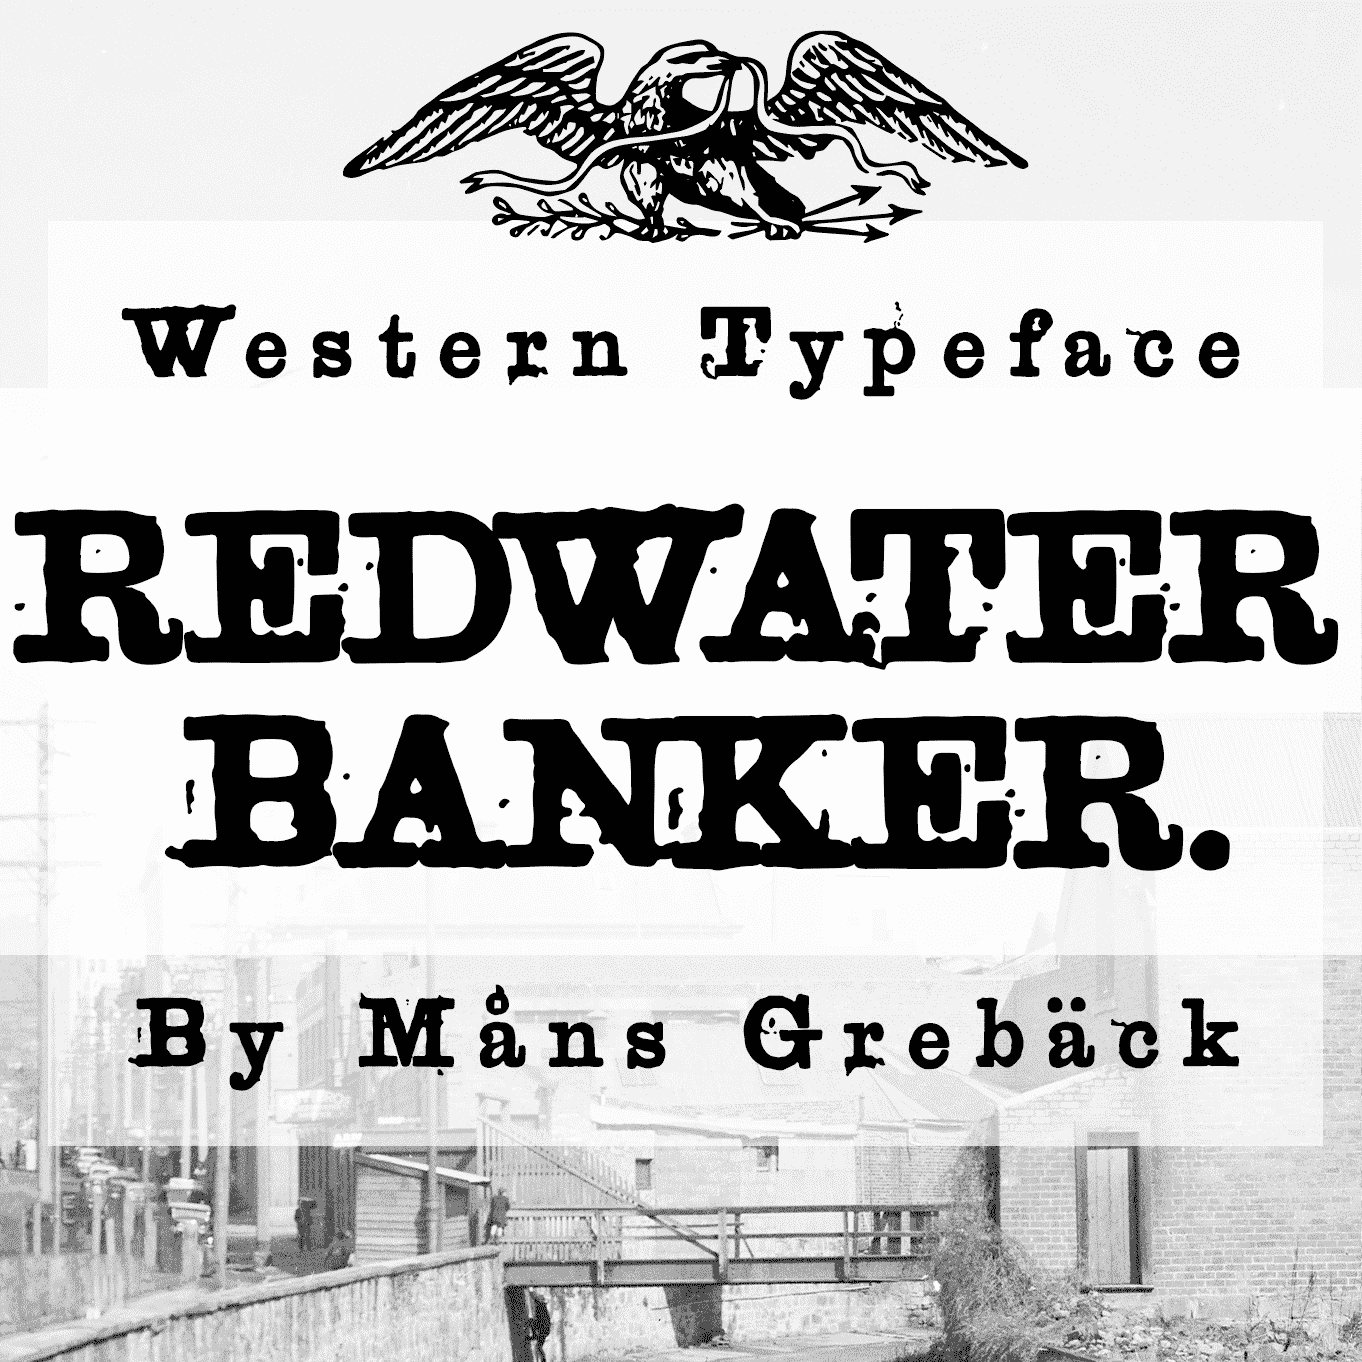 Redwater Banker PERSONAL USE